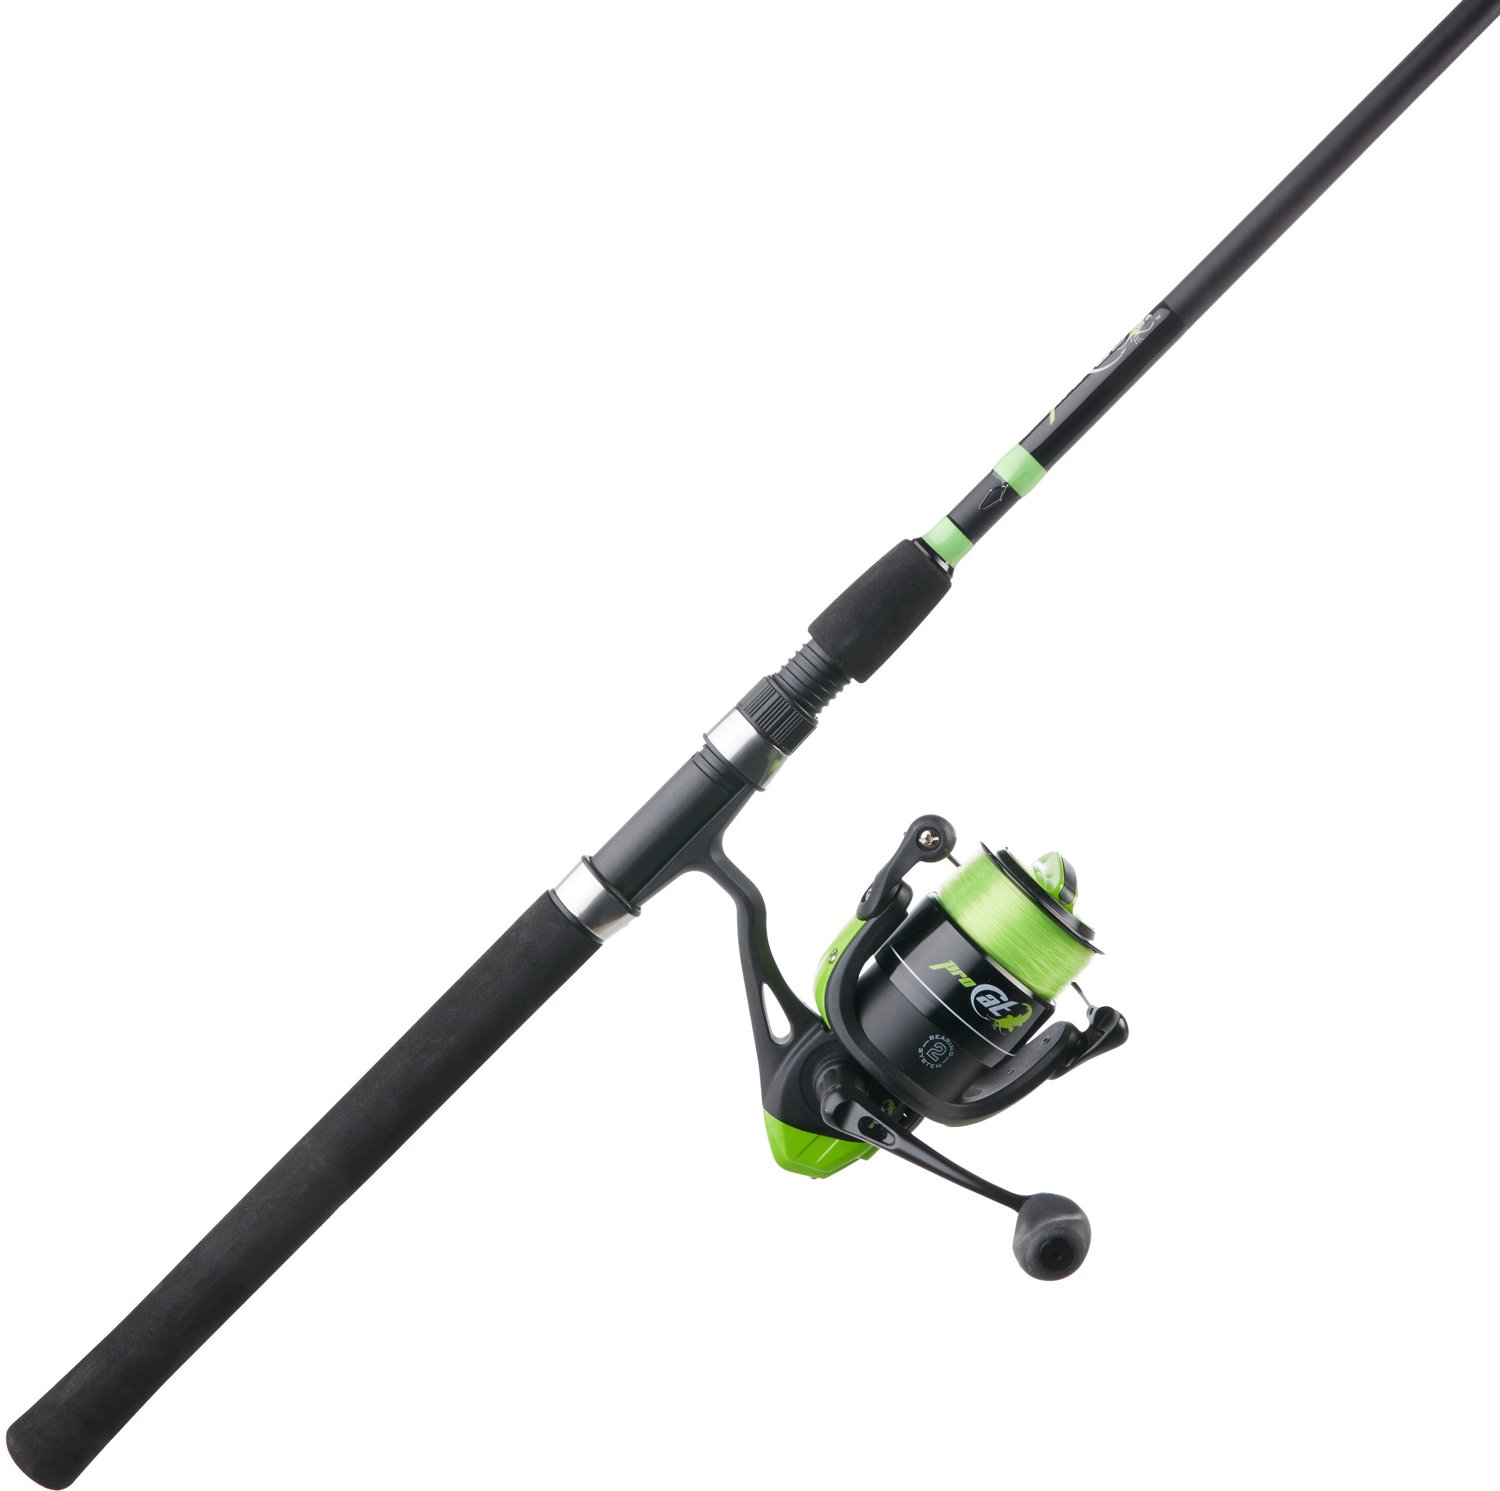 $50 BASS FISHING Combo from ACADEMY (H2O Xpress) - Worth it